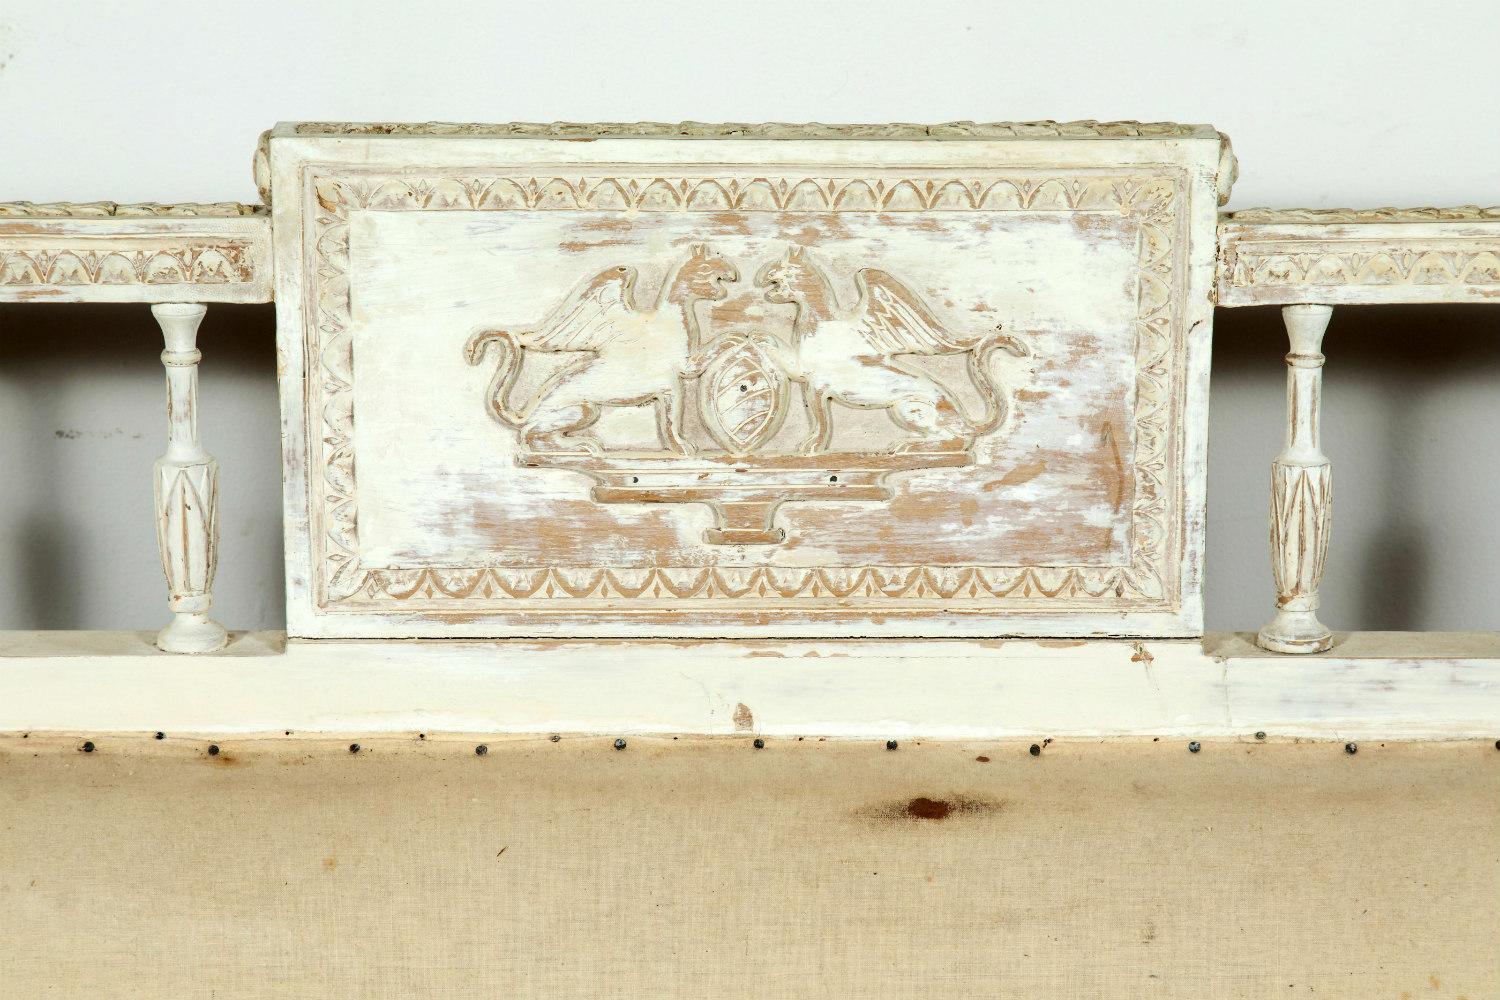 19th century Swedish neoclassical whitewashed sofa bench made in Sweden during the period 1790-1810, featuring carving all around that includes laurel drops, carved lower and upper rails, and a nicely carved back pediment with sphinxes. Needs to be